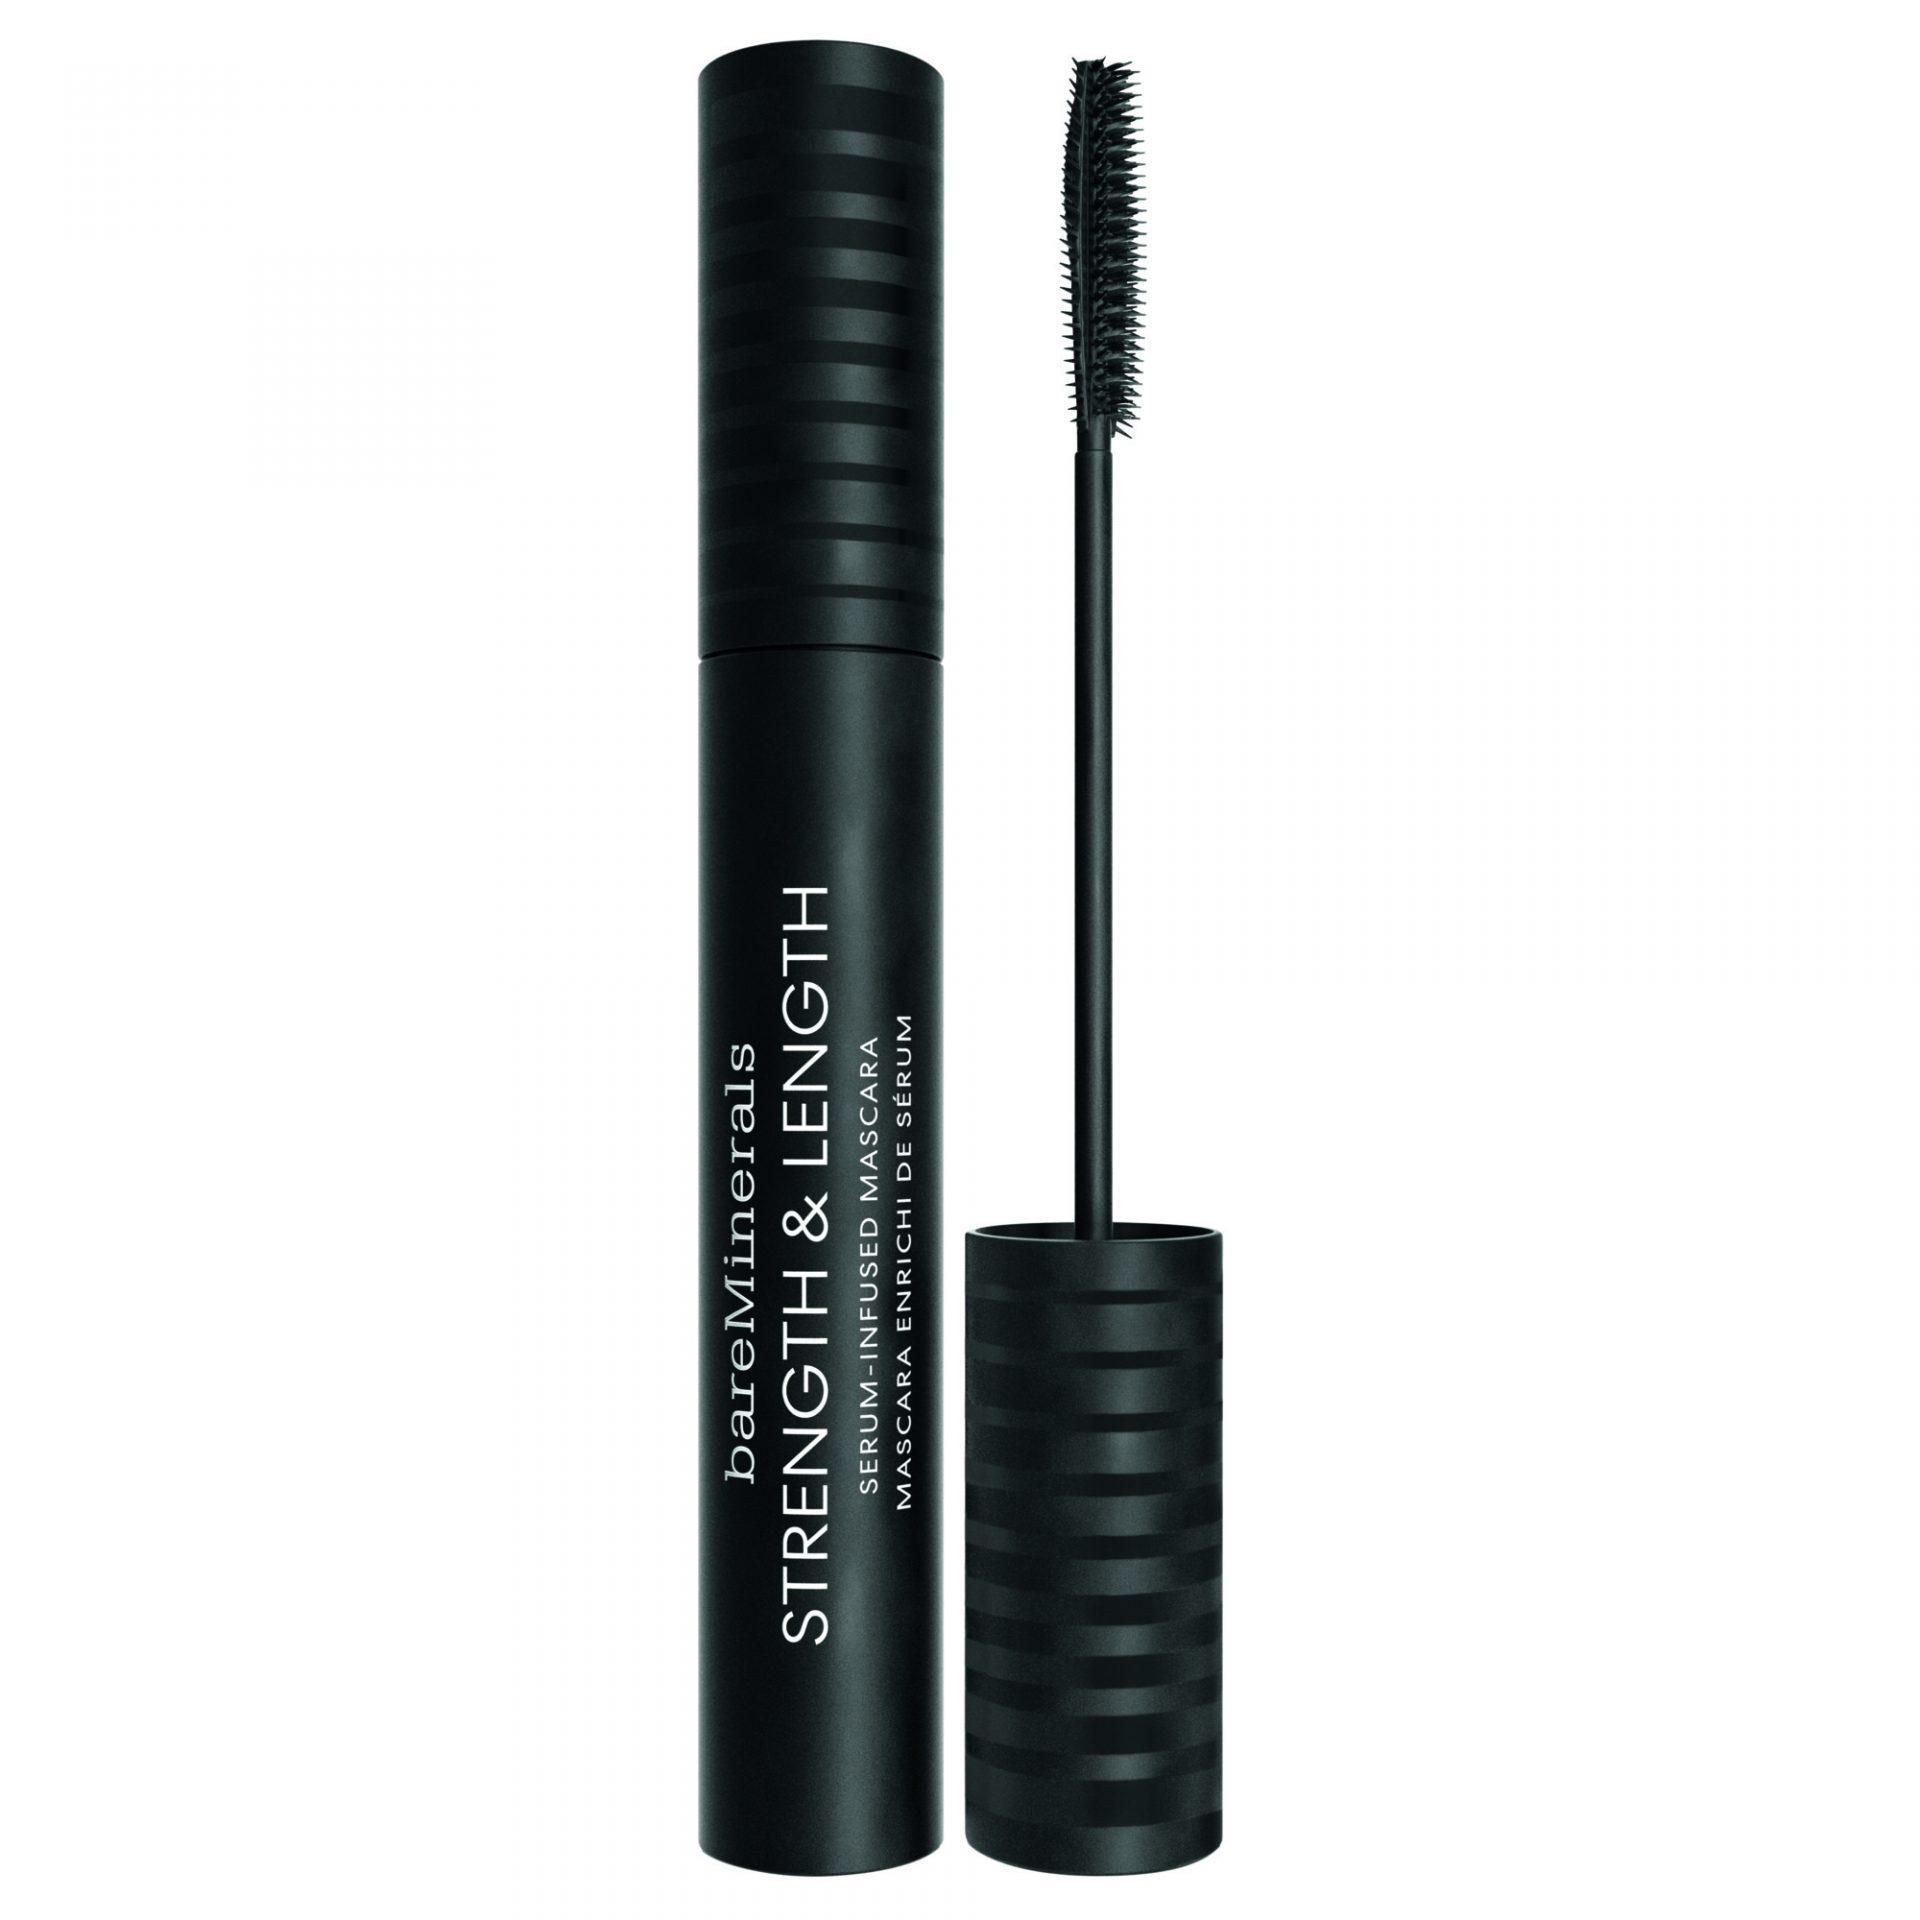 bareminerals flawless definition waterproof mascara review